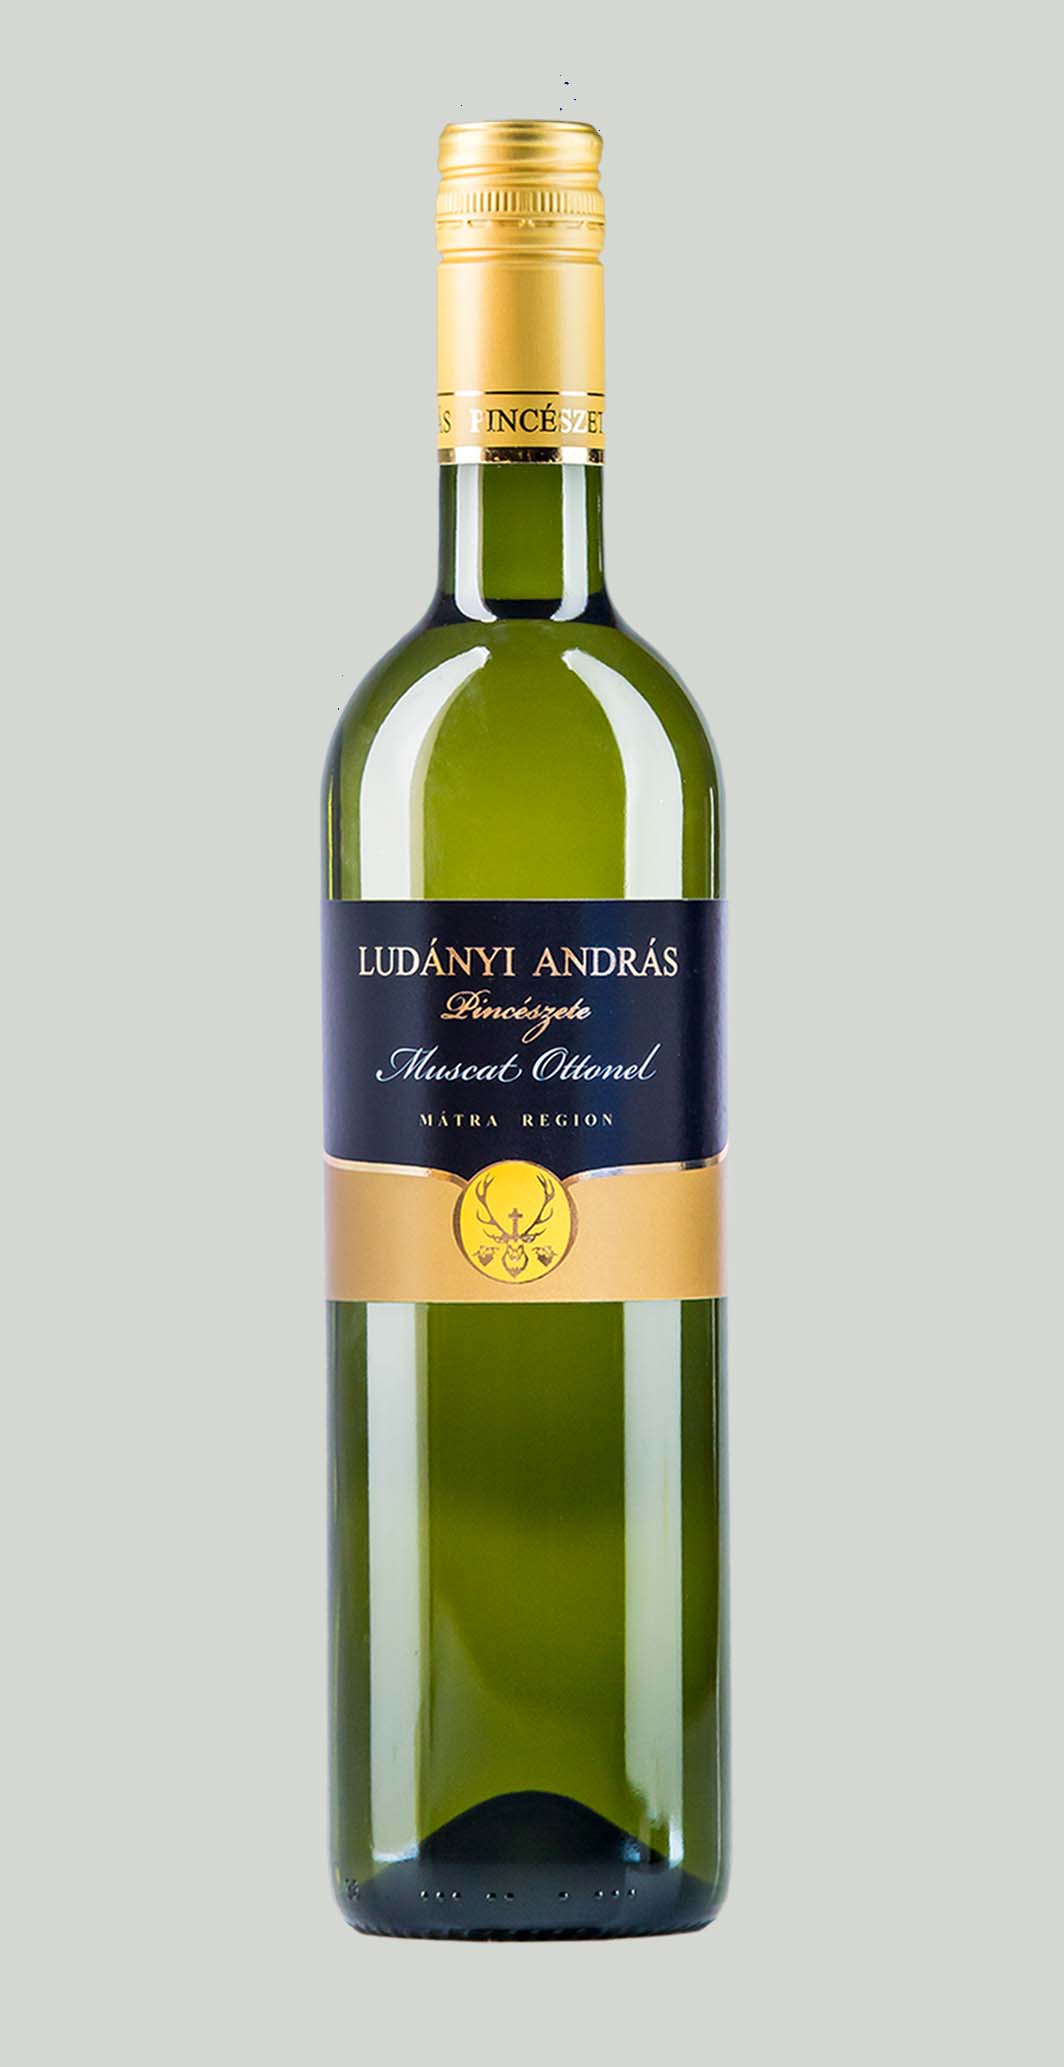 Ludanyi Andras Muscat Ottonel 2021 | Hungarian Wine House